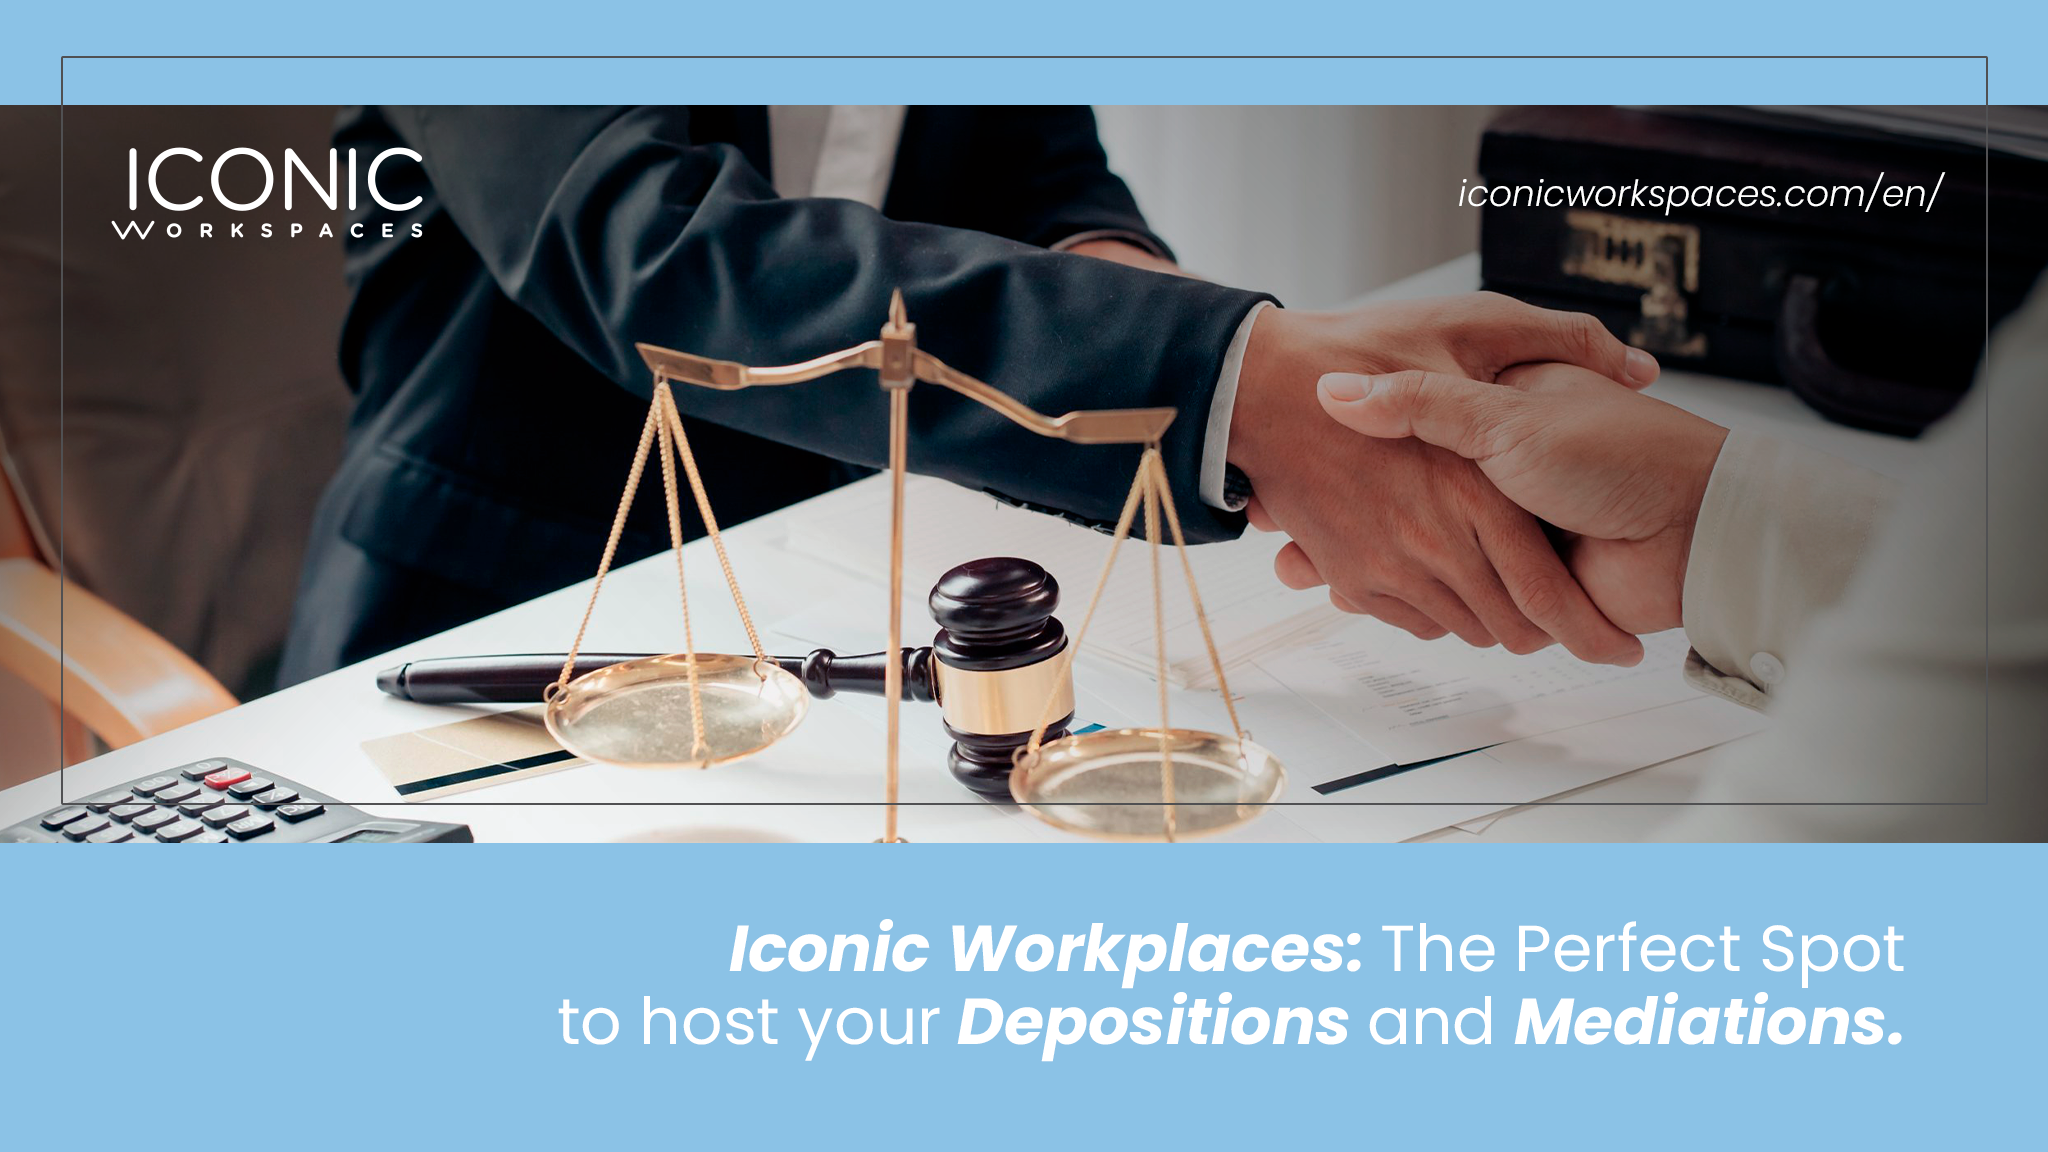 Iconic Workspaces: The Perfect Spot to Host Your Depositions and Mediations